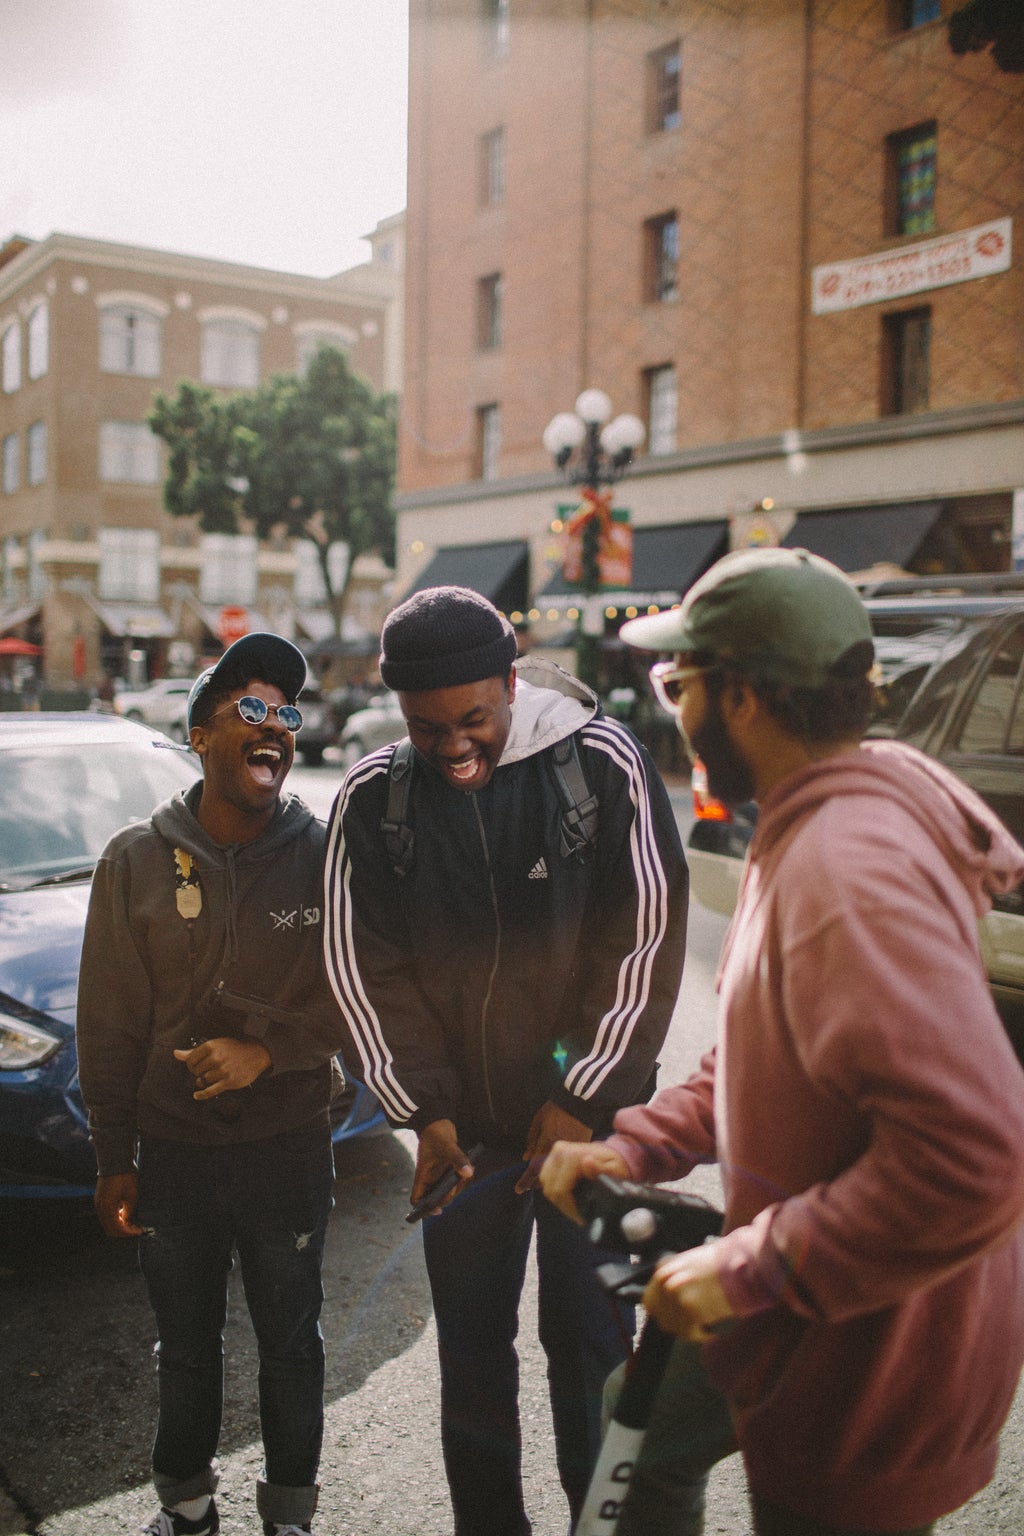 Three men in jackets laughing on the street